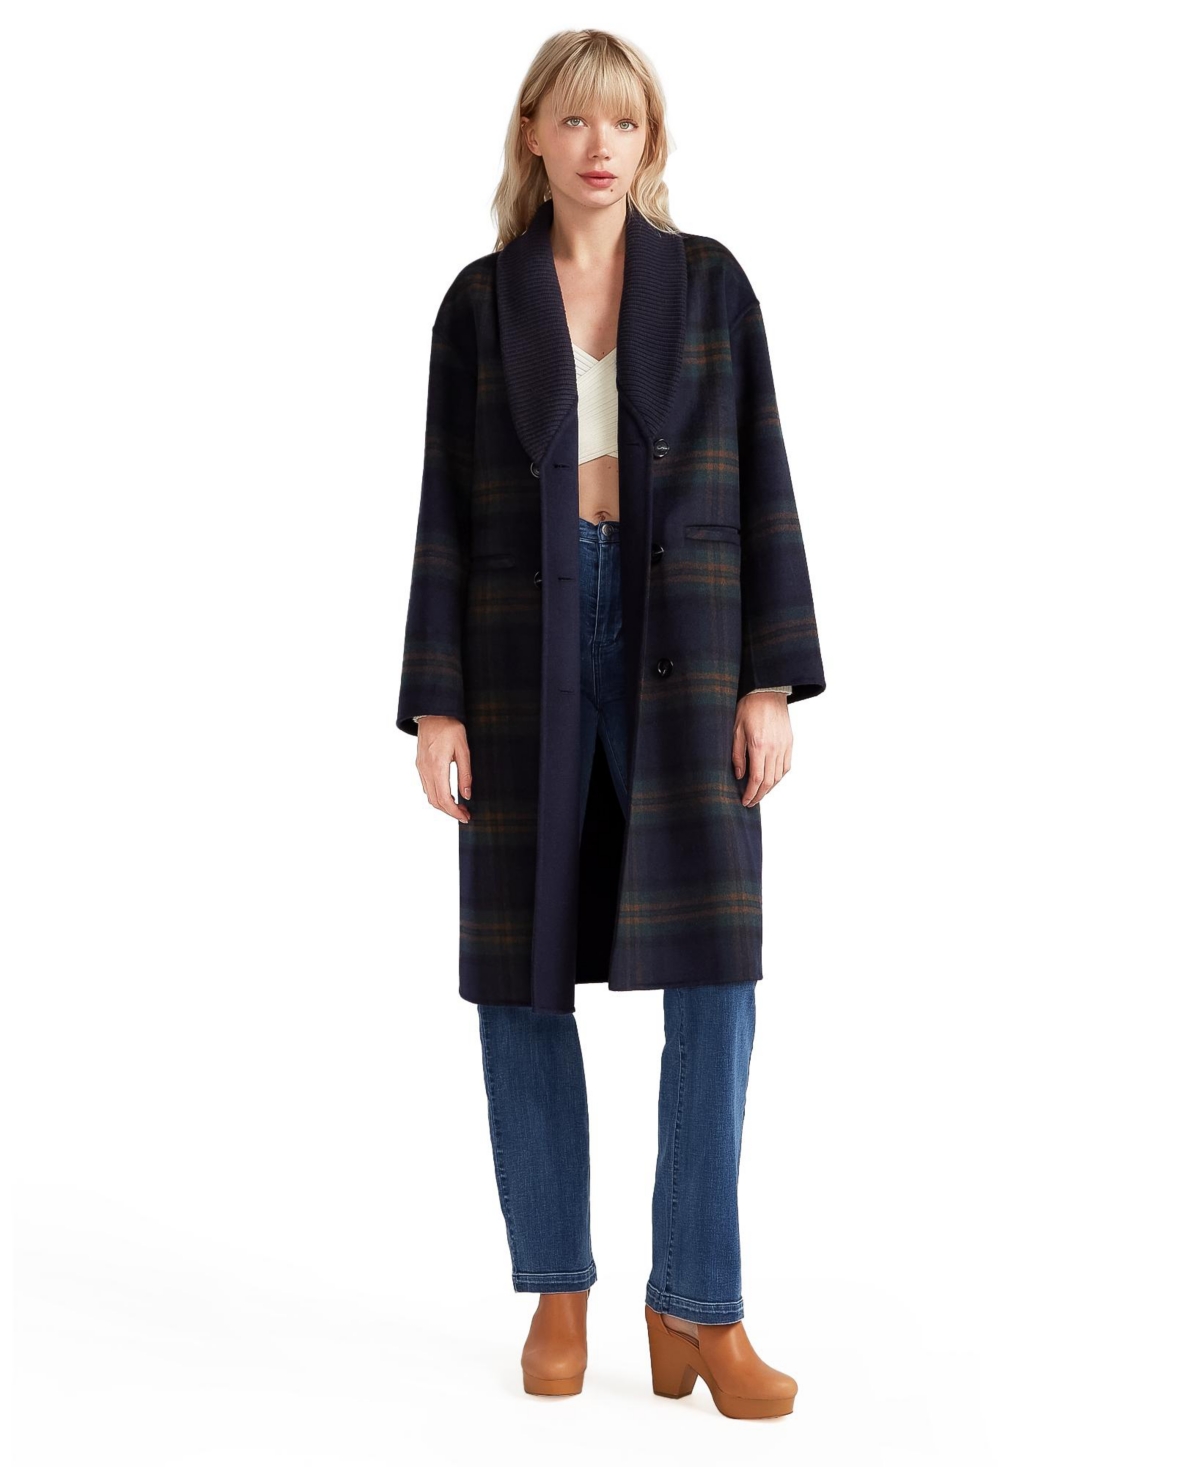 BELLE & BLOOM WOMEN EMPIRE STATE OF MIND COLLARED COAT